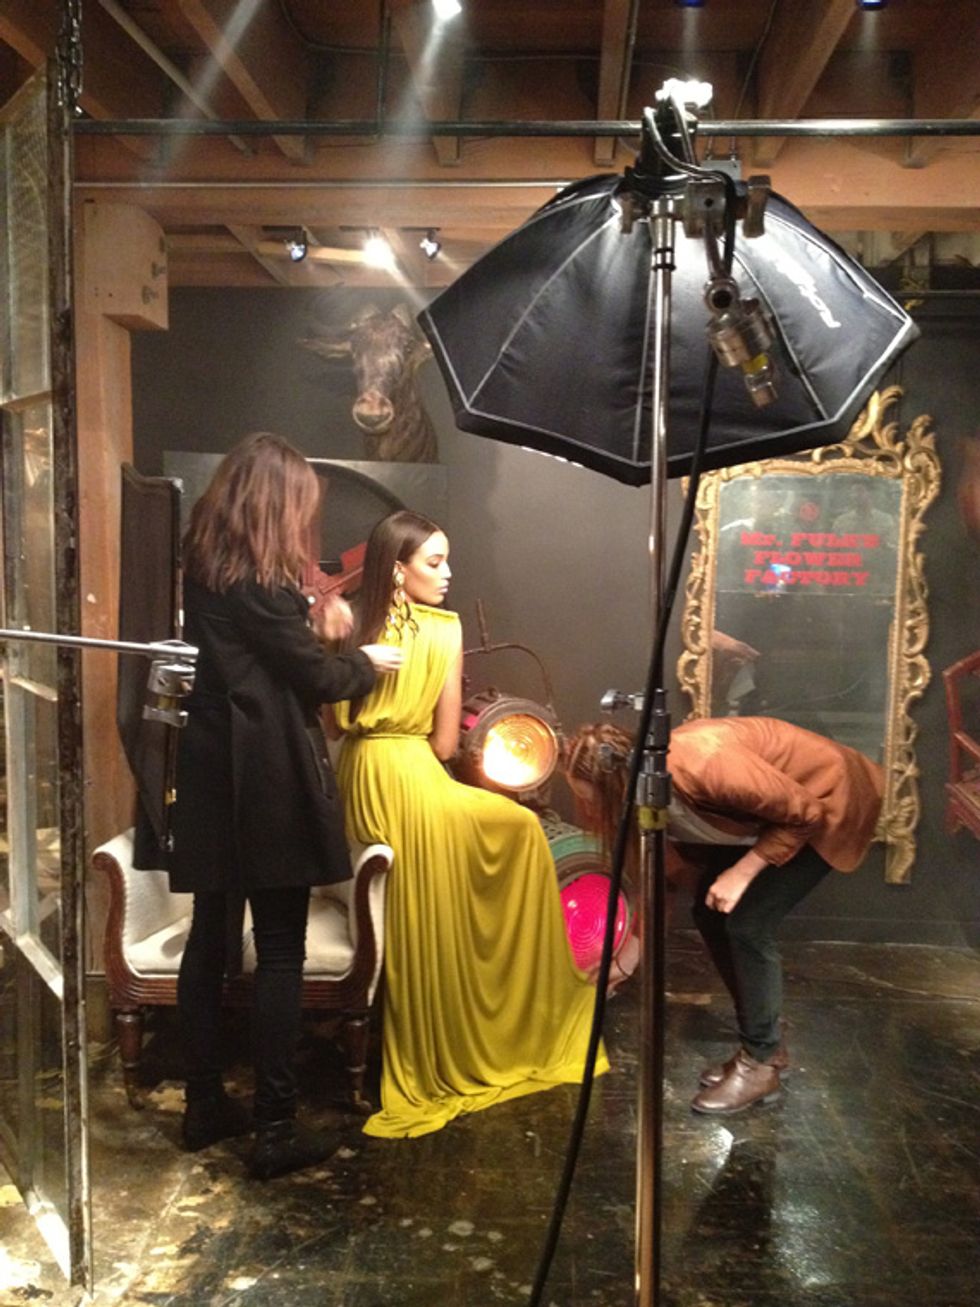 Behind the Scenes: 7x7 Magazine's March Cover Shoot